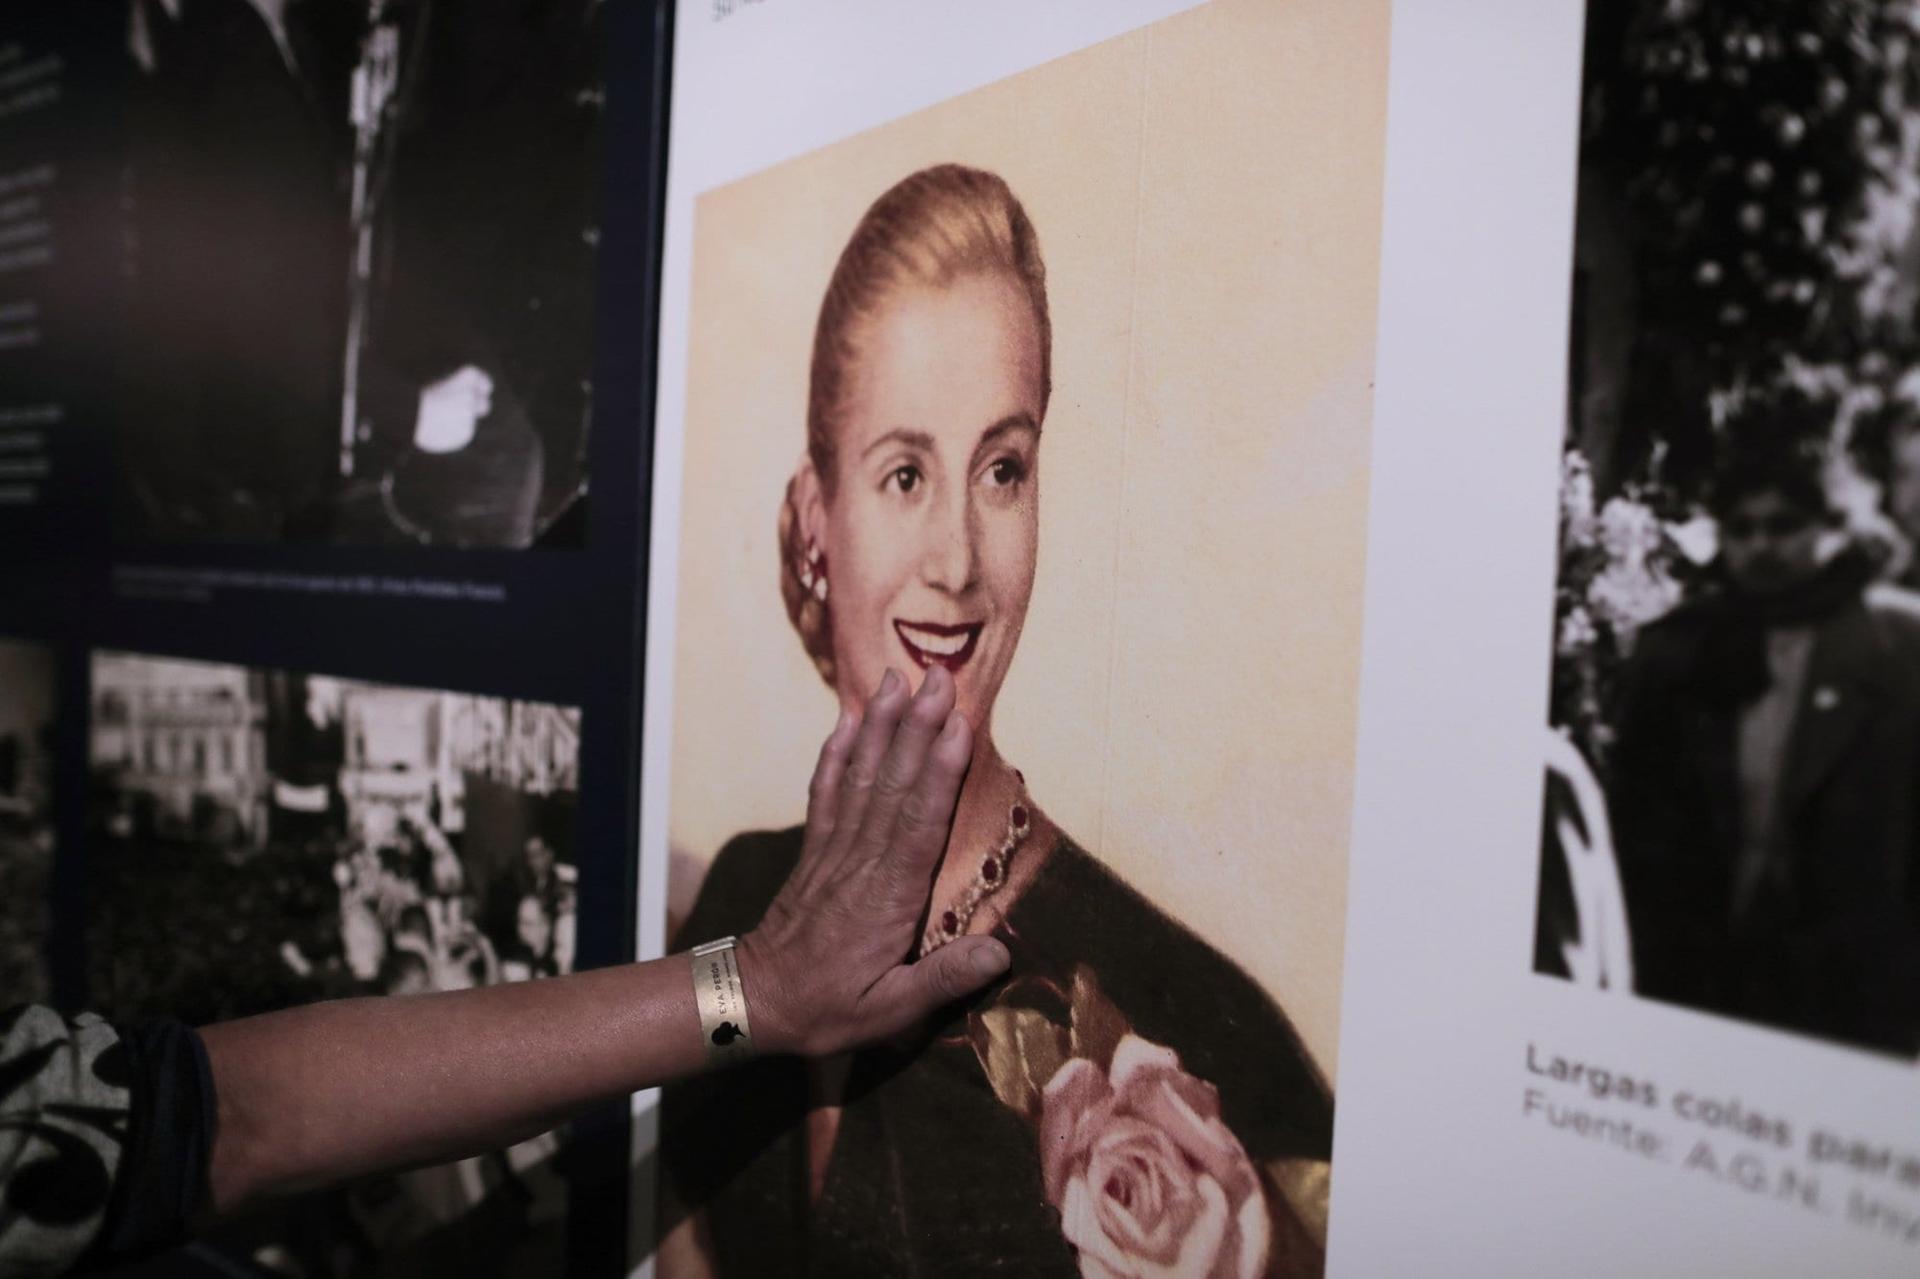 Argentine union wants Evita to be saint, Church says ‘not so fast’